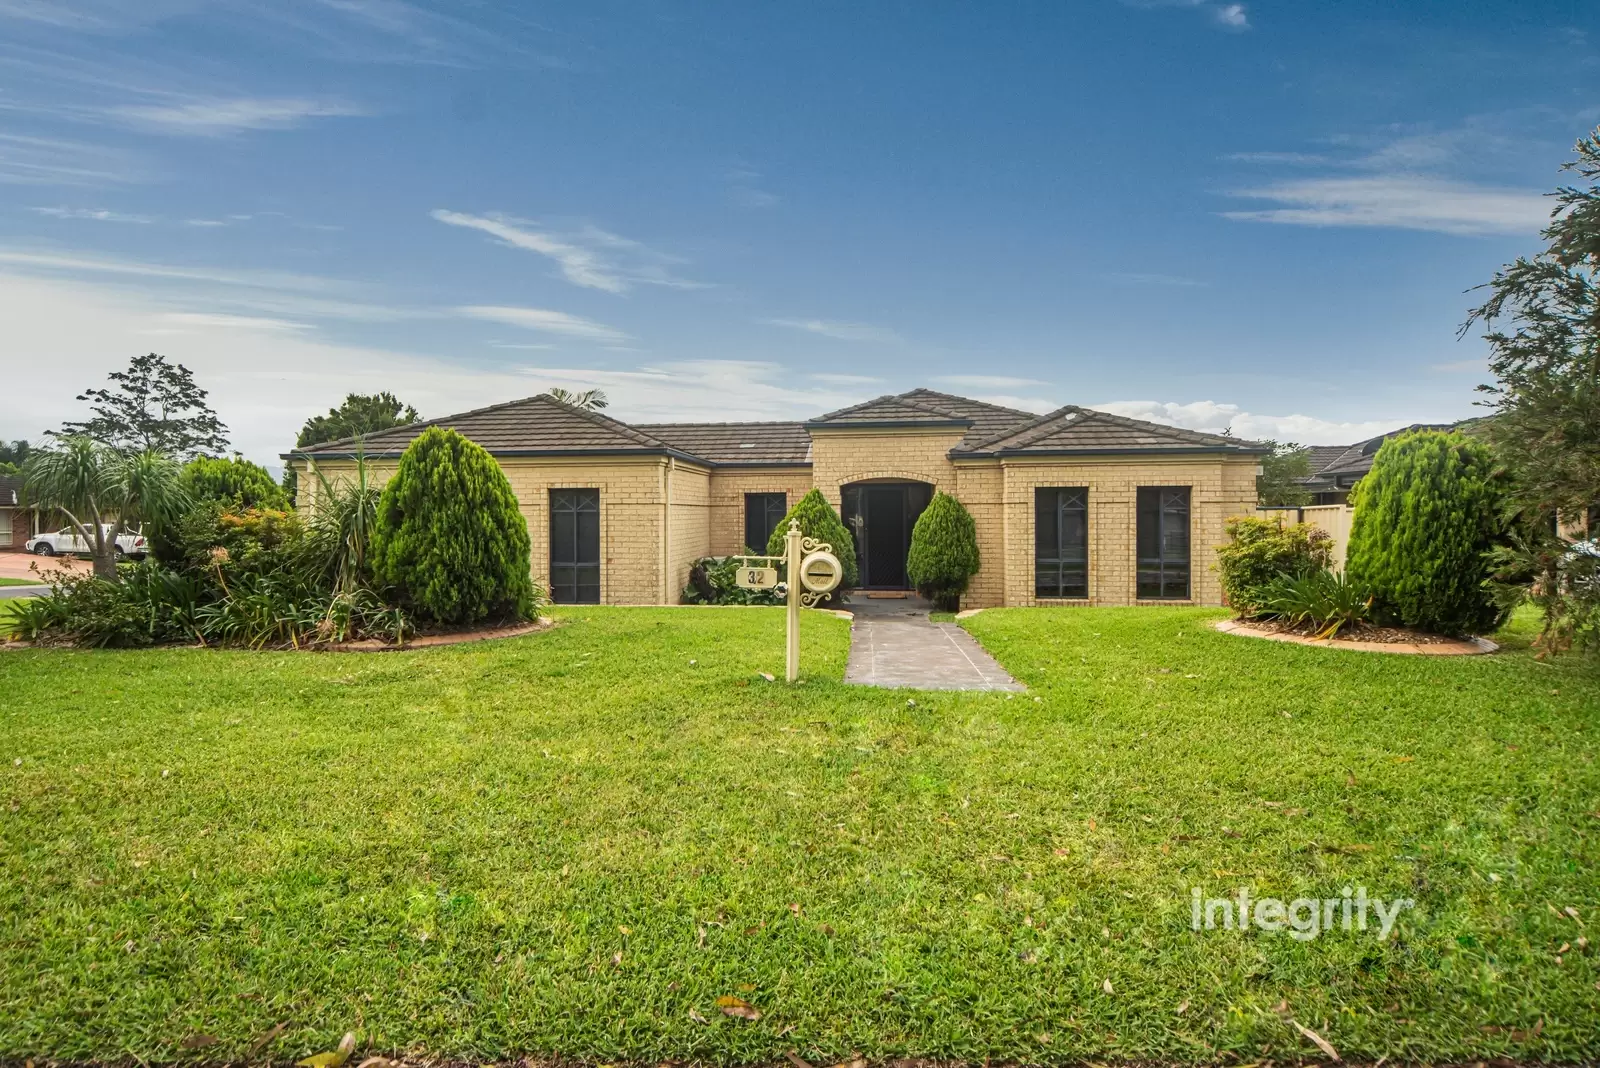 32 The Garden Walk, Worrigee For Sale by Integrity Real Estate